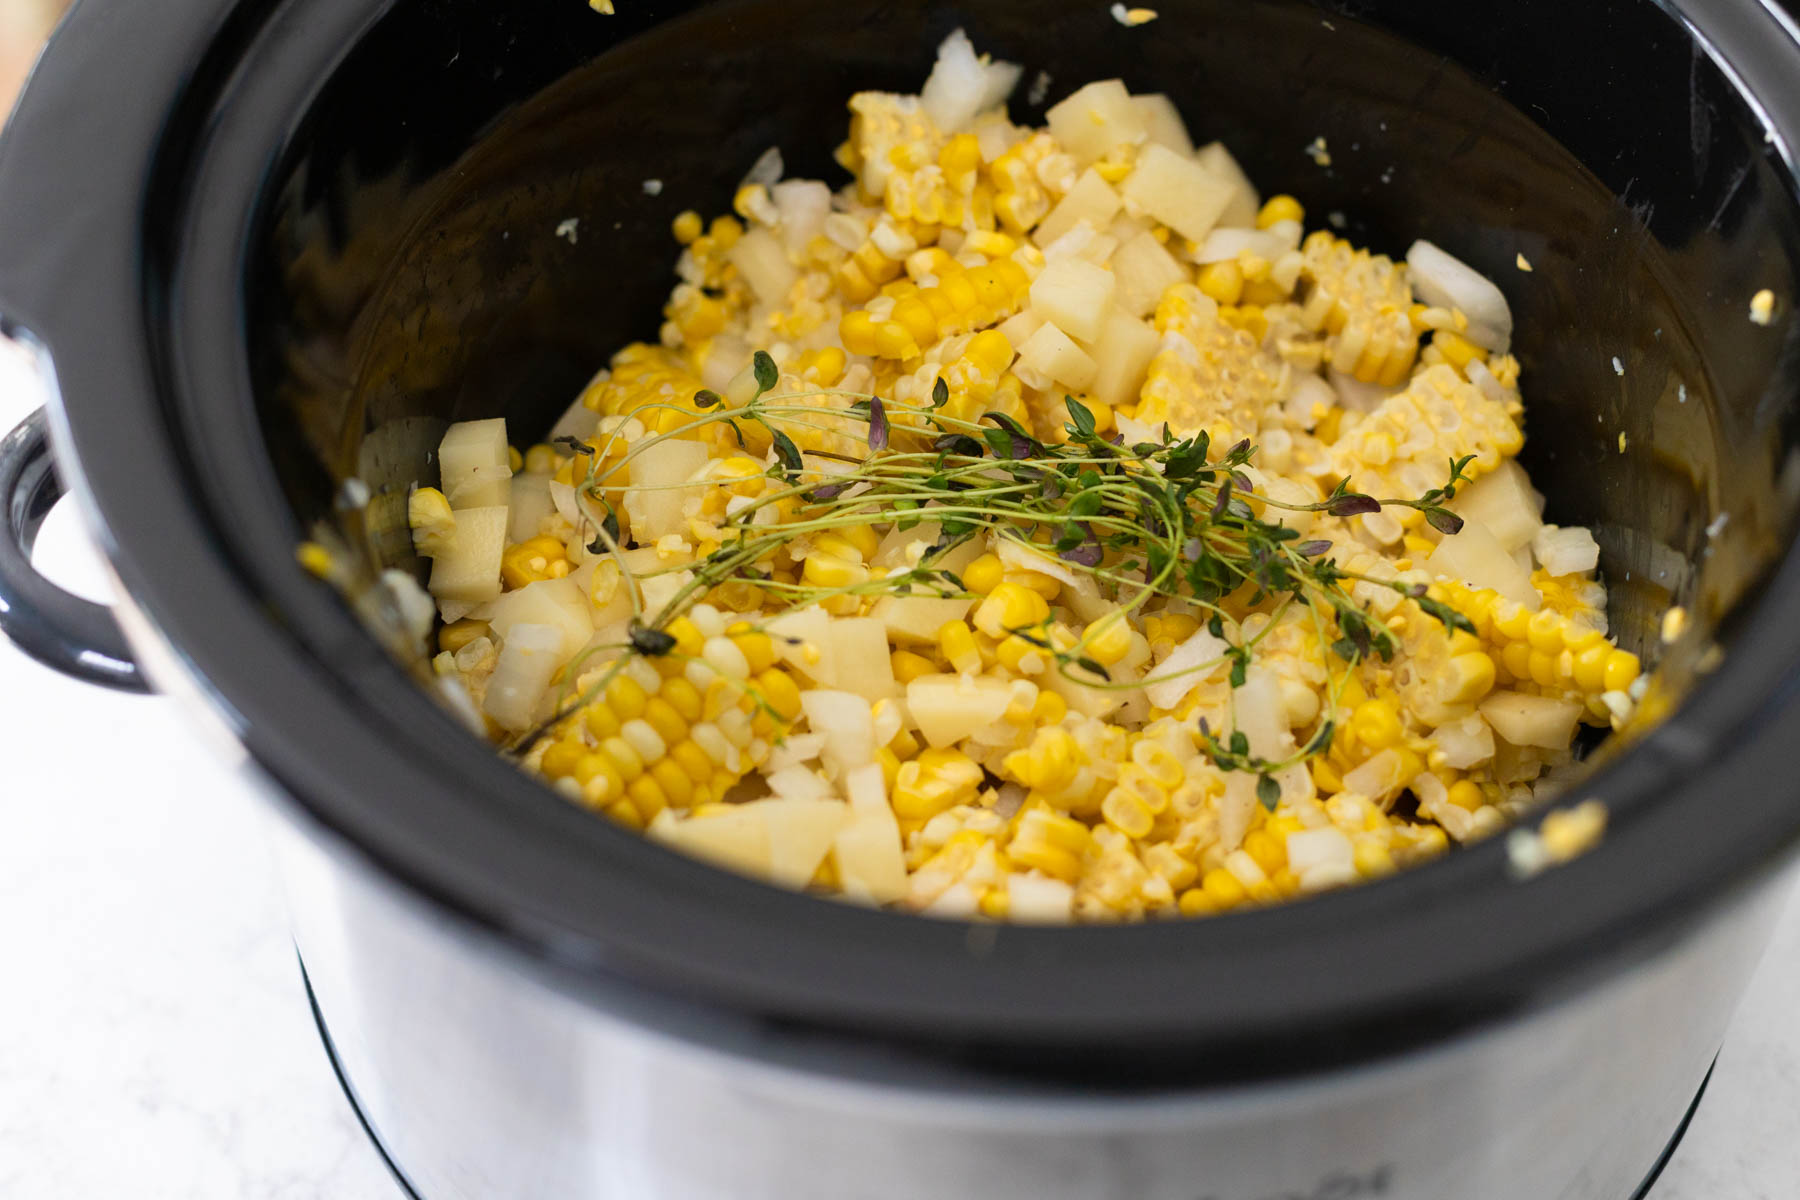 The corn, potatoes, onion, and fresh herbs are ready to cook in the slowcooker.